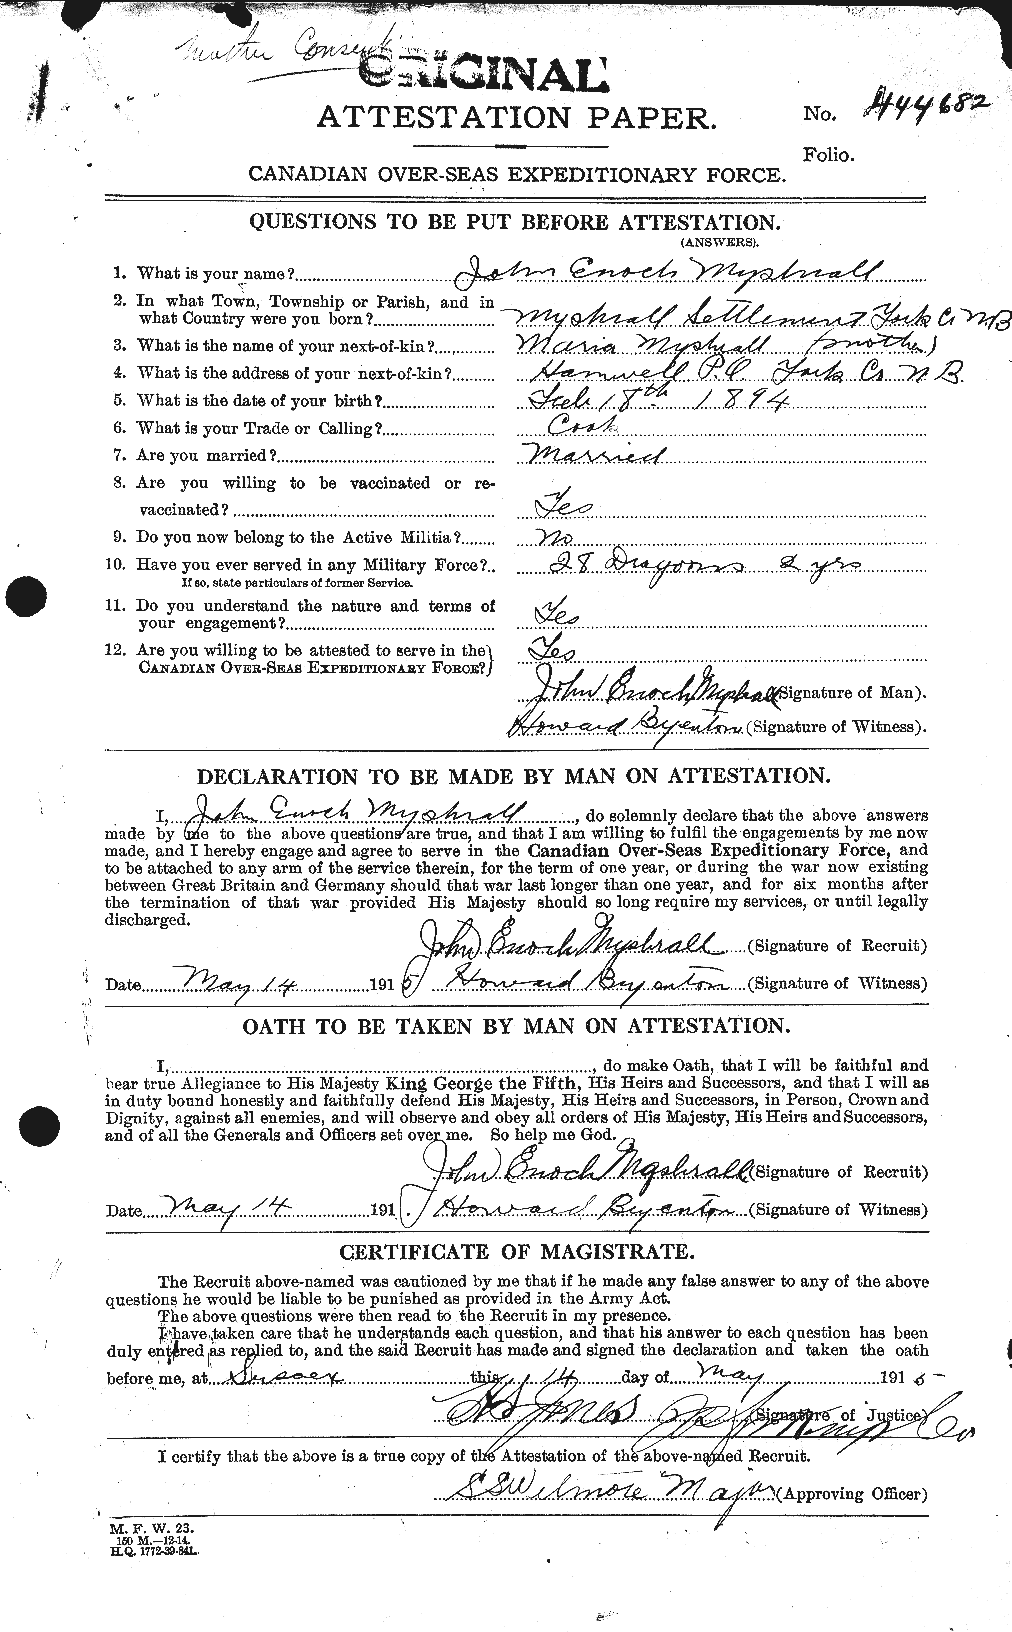 Personnel Records of the First World War - CEF 518053a